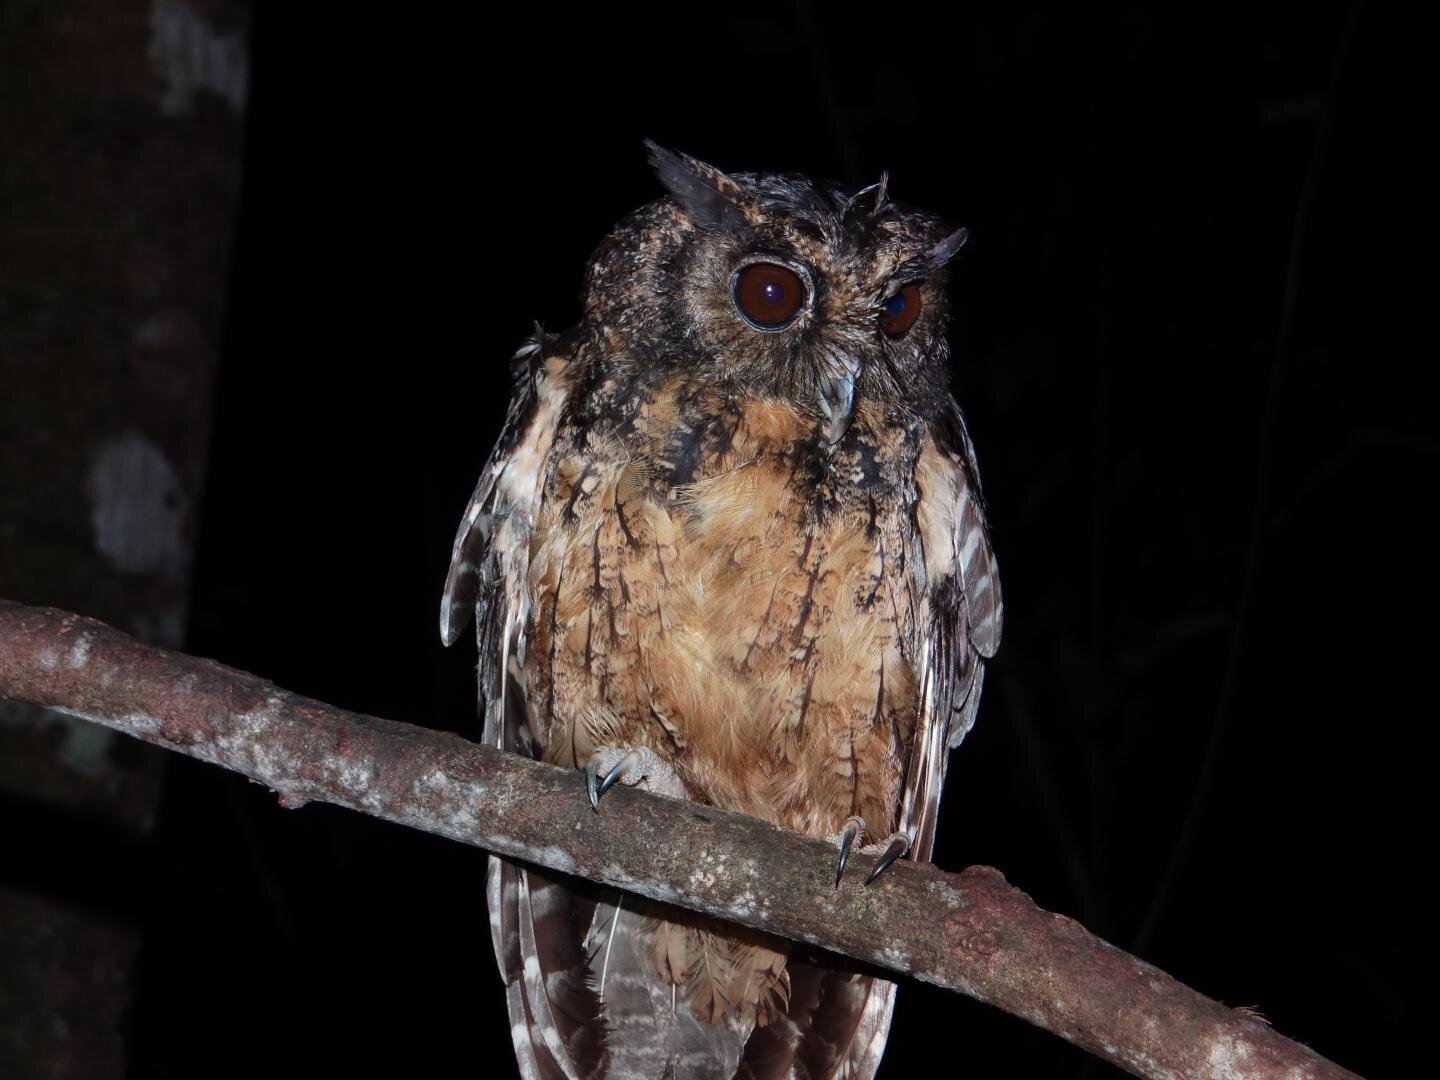 Two new species of already-endangered screech owls discovered in Amazon rainforest